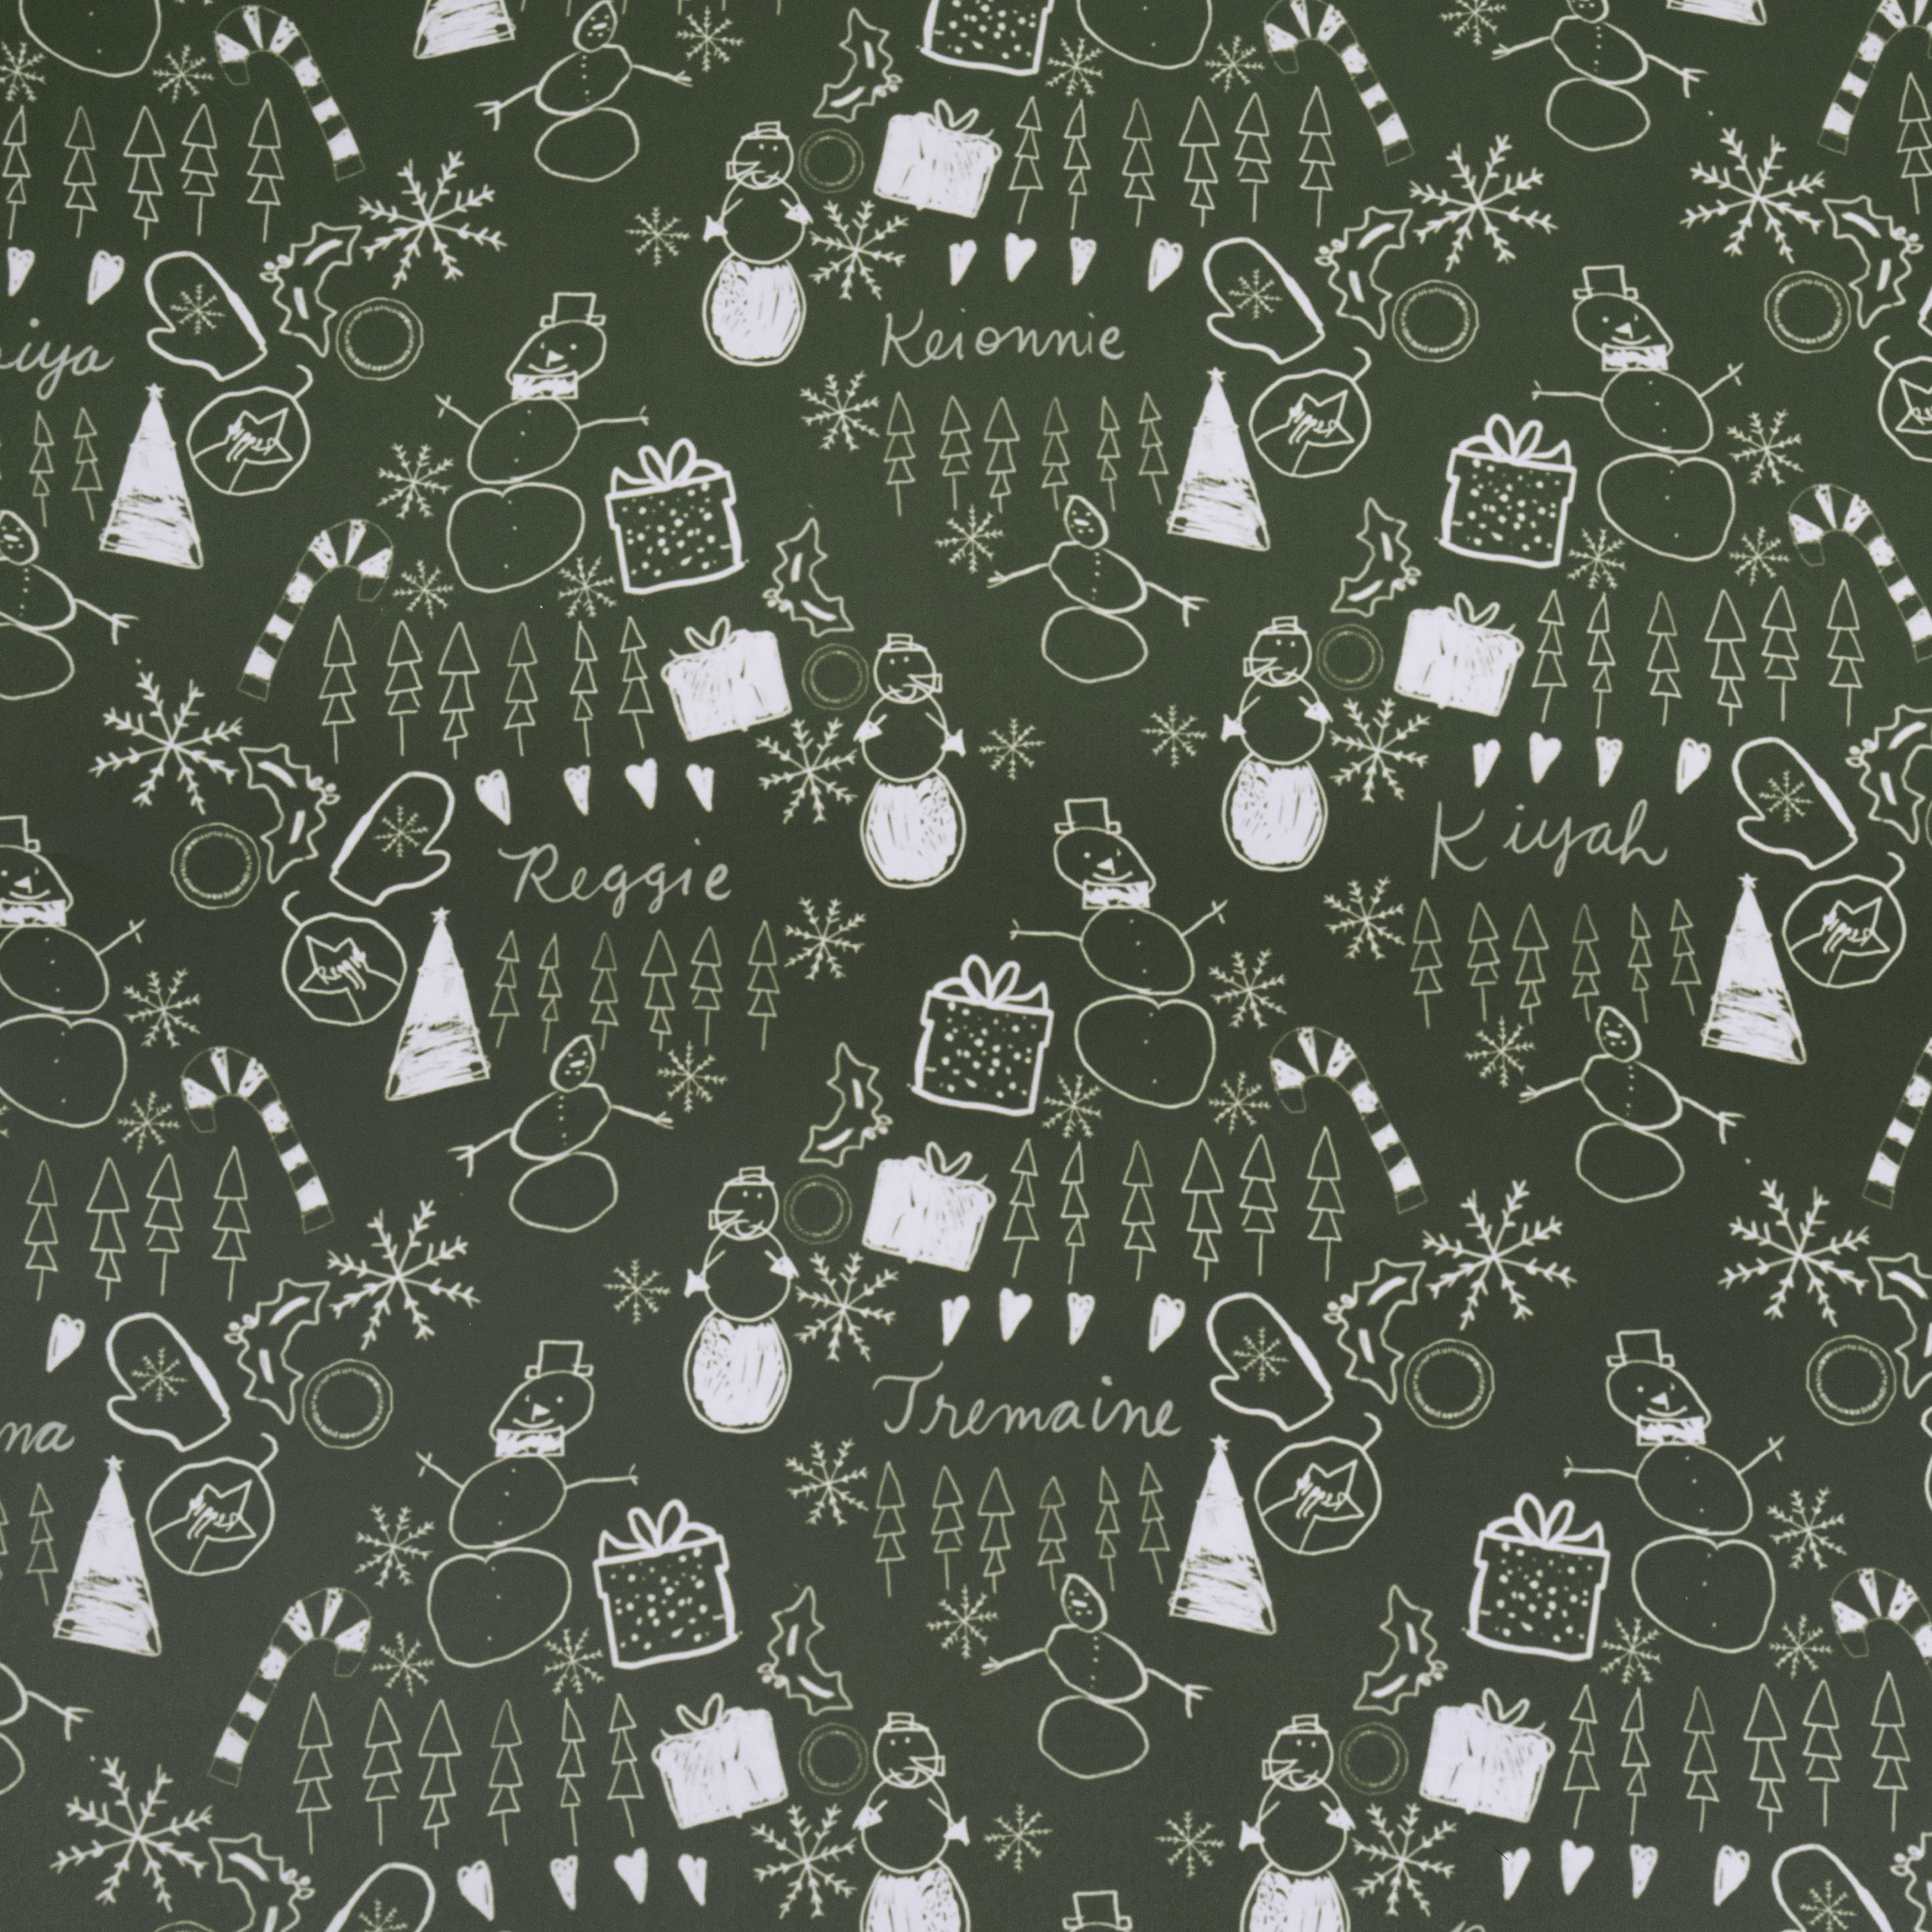 Uniquely Designed Holiday Wrapping Paper-Set 2